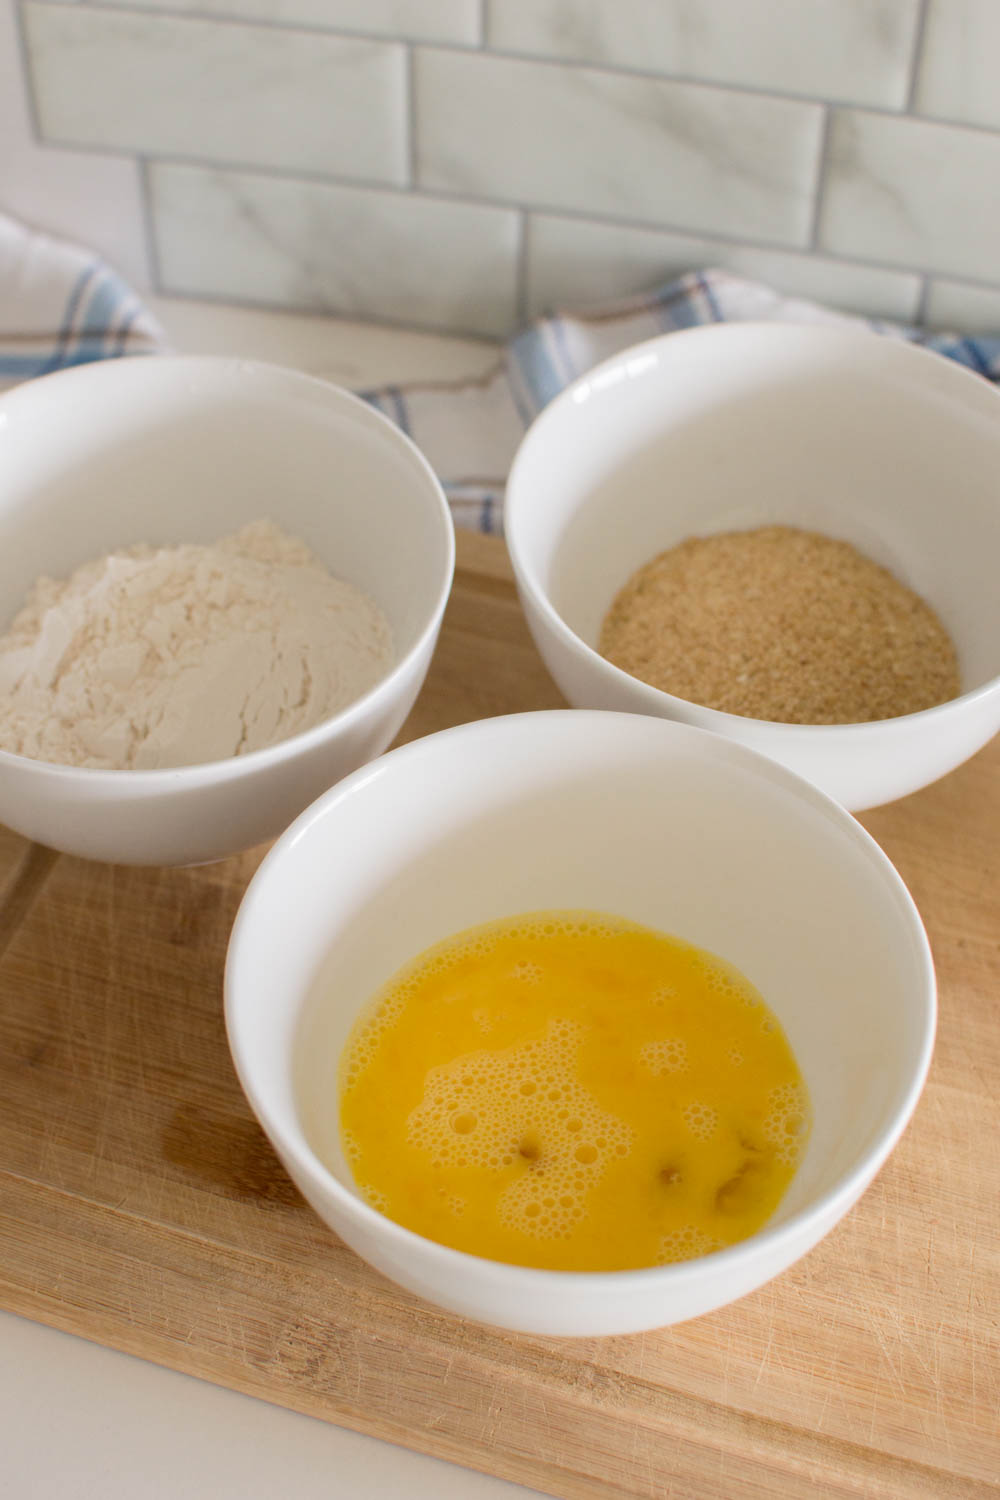 Egg wash, flour and bread crumbs each in their own white bowls